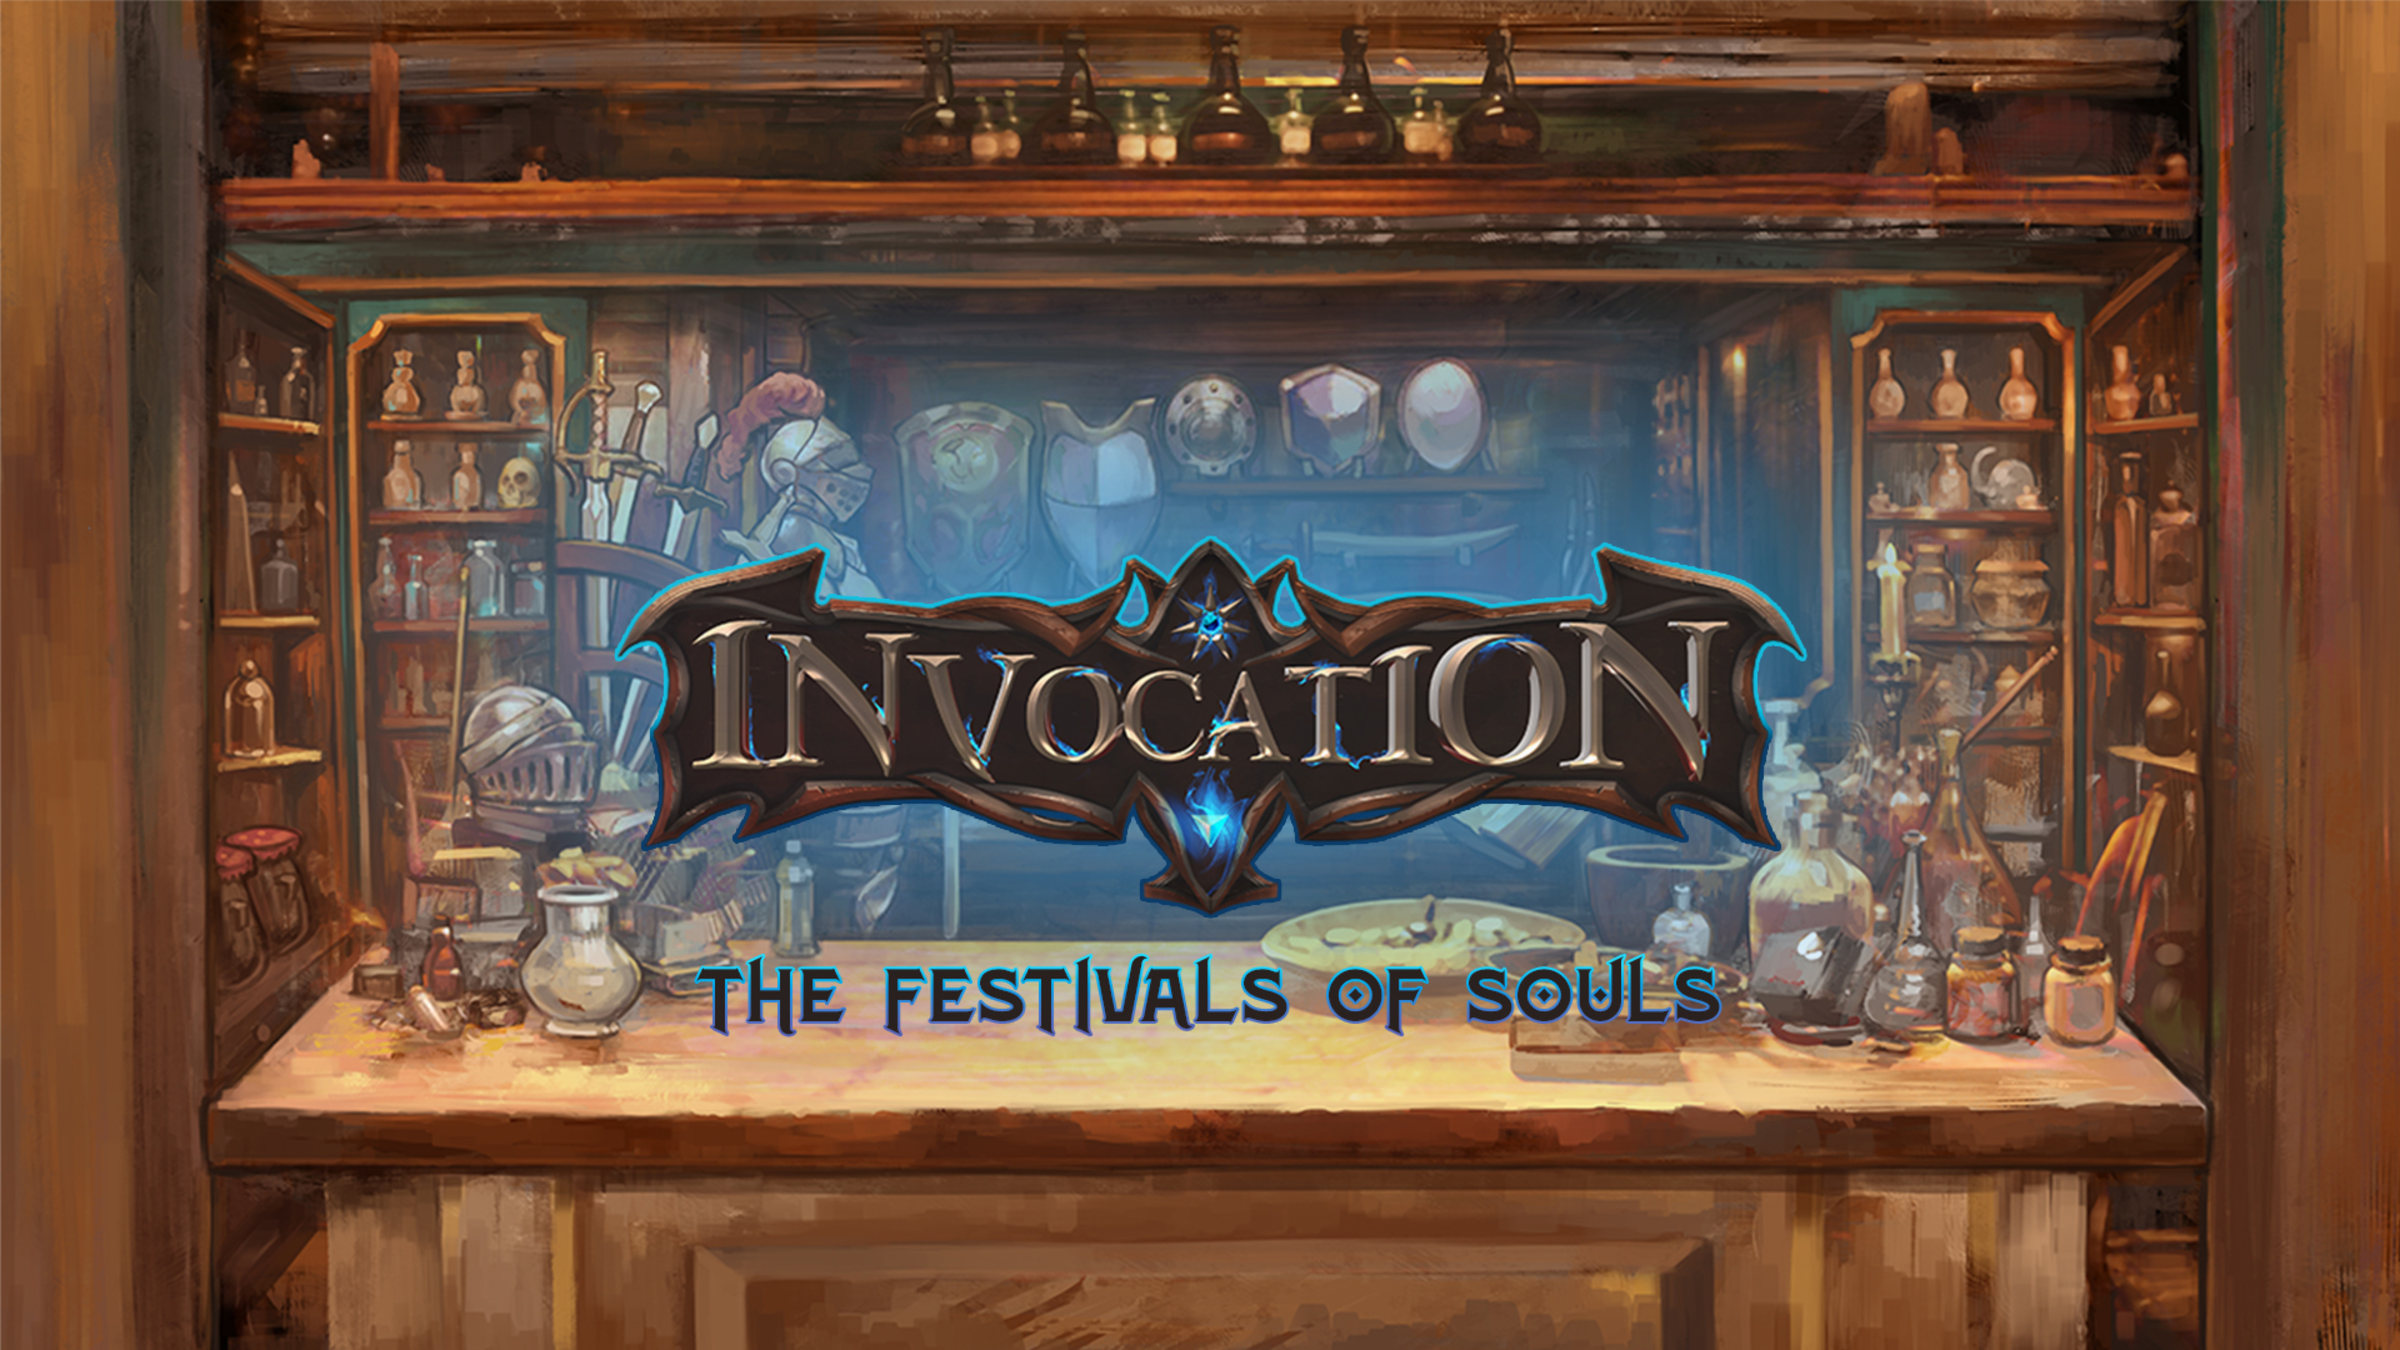 https://assets.nintendo.com/image/upload/c_fill,w_1200/q_auto:best/f_auto/dpr_2.0/ncom/en_US/games/switch/i/invocation-the-festival-of-souls-switch/